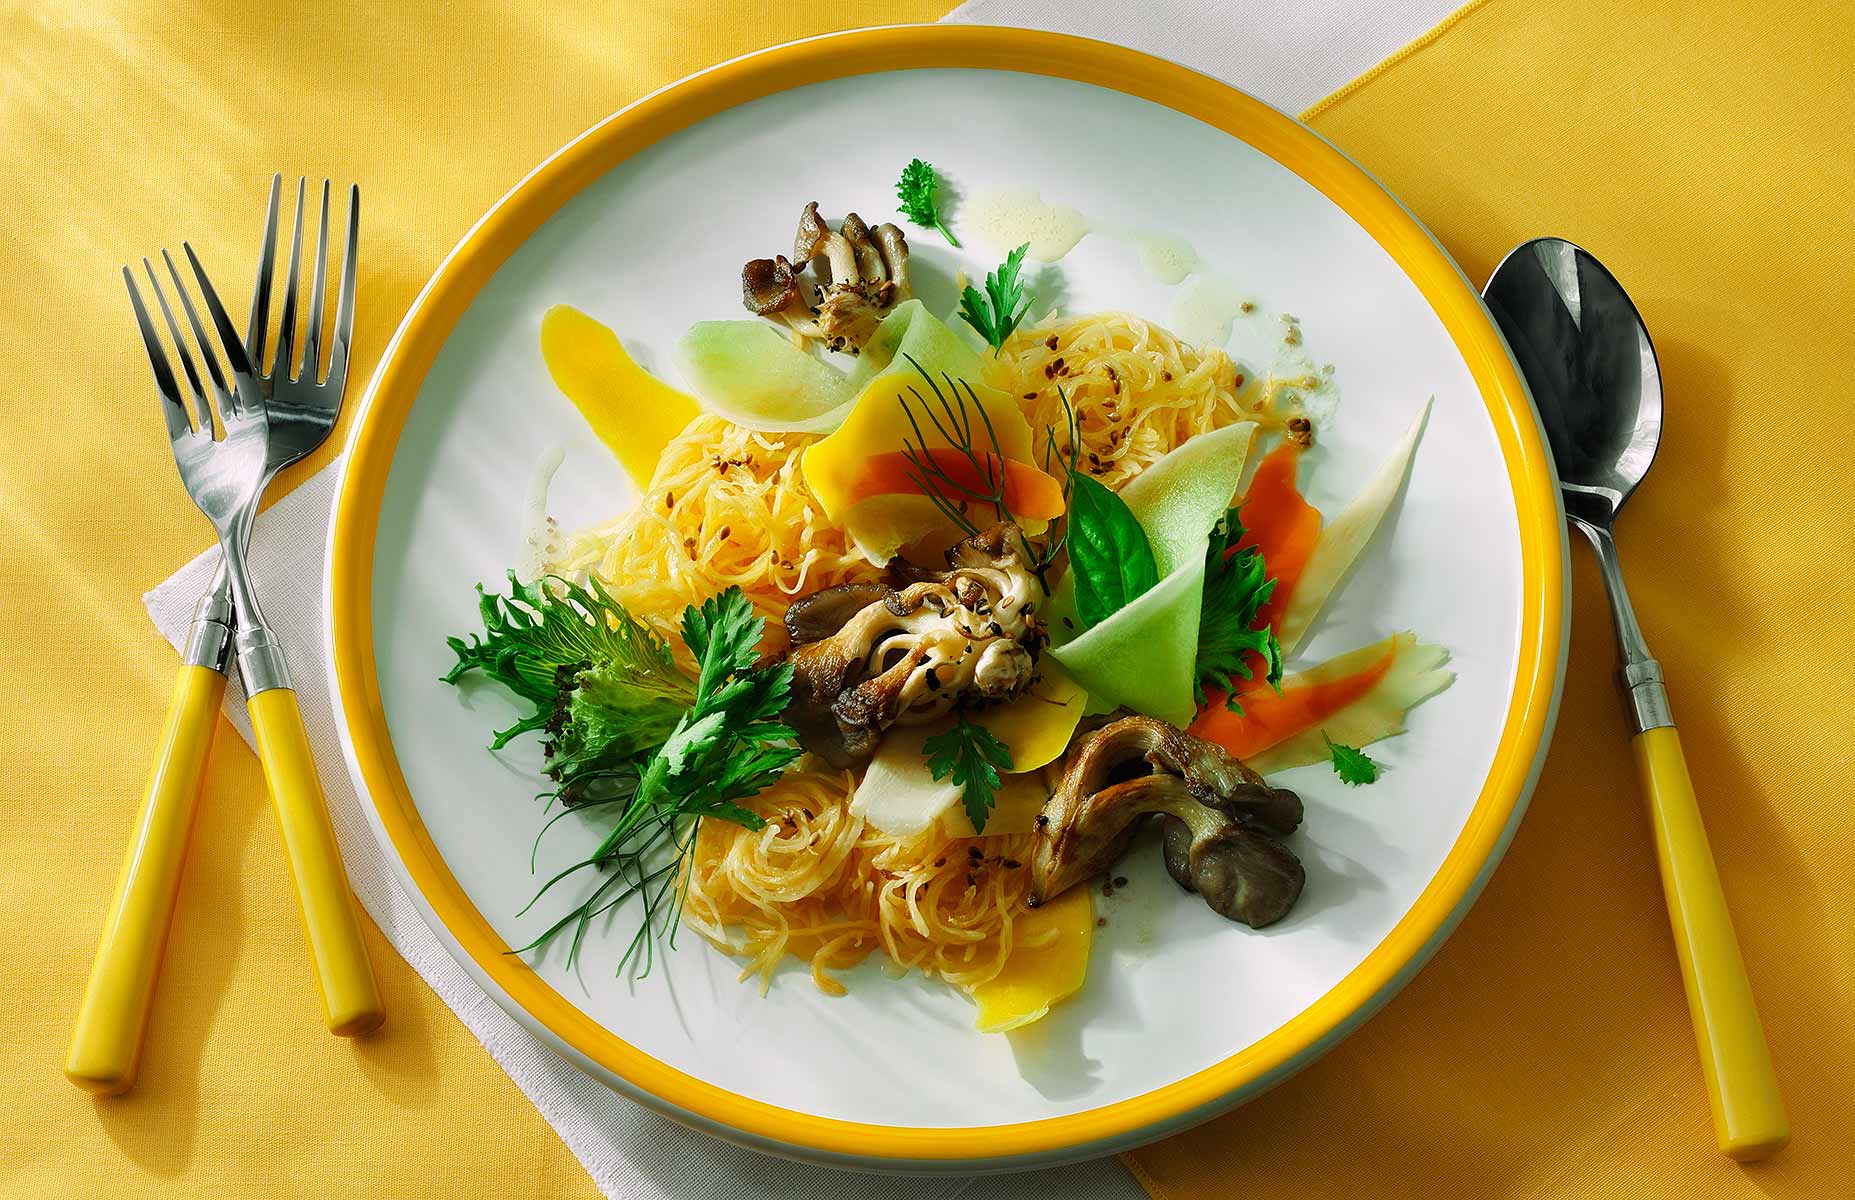 A colorful and bold landscape image evoking the gifts of the new spring season. A slightly overhead angle of view finds the composition on fine bright yellow and white linens. The spaghetti squash is baked and topped with mushrooms, mango slices, honeydo melon, cantalope, carrot shavings and frest herbs. Virgin olive oil is drizzled over all and the streaking light from back left adds intense dimension to the subject.